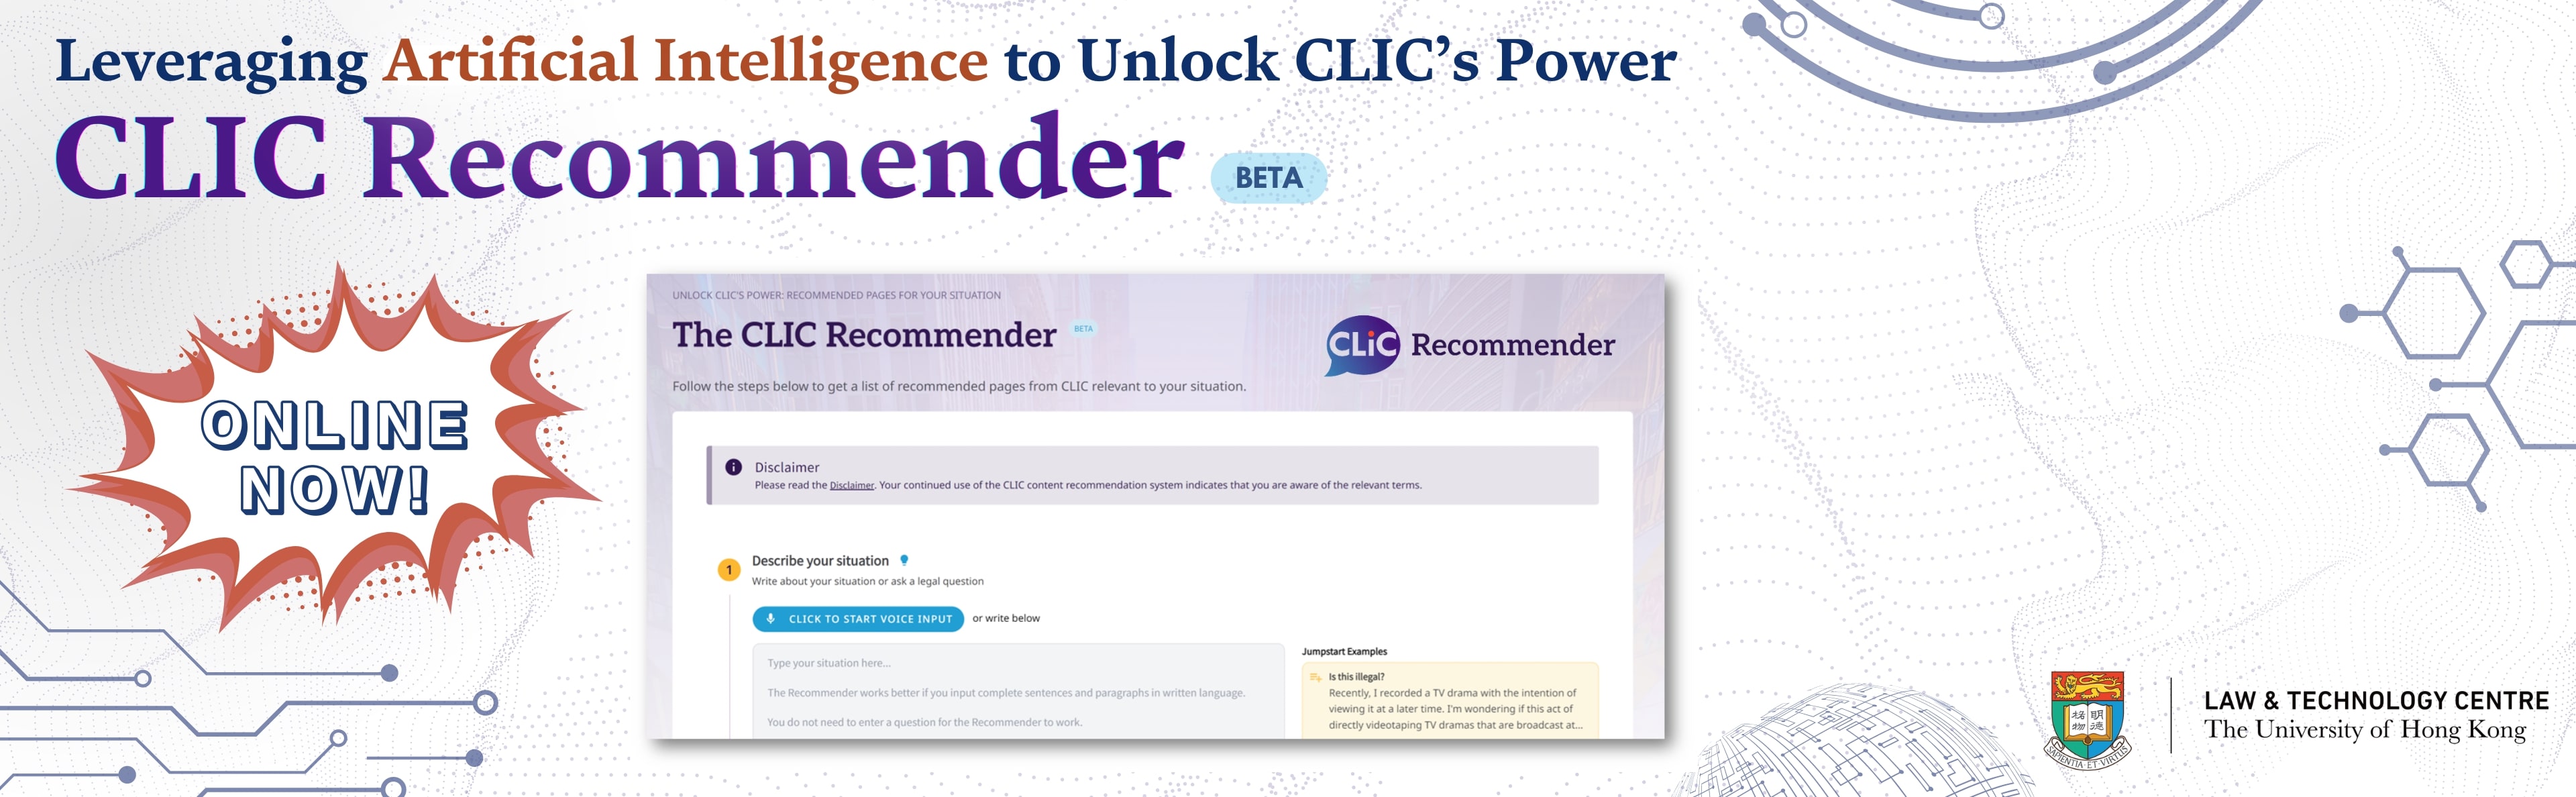 Beta Launch of CLIC Recommender